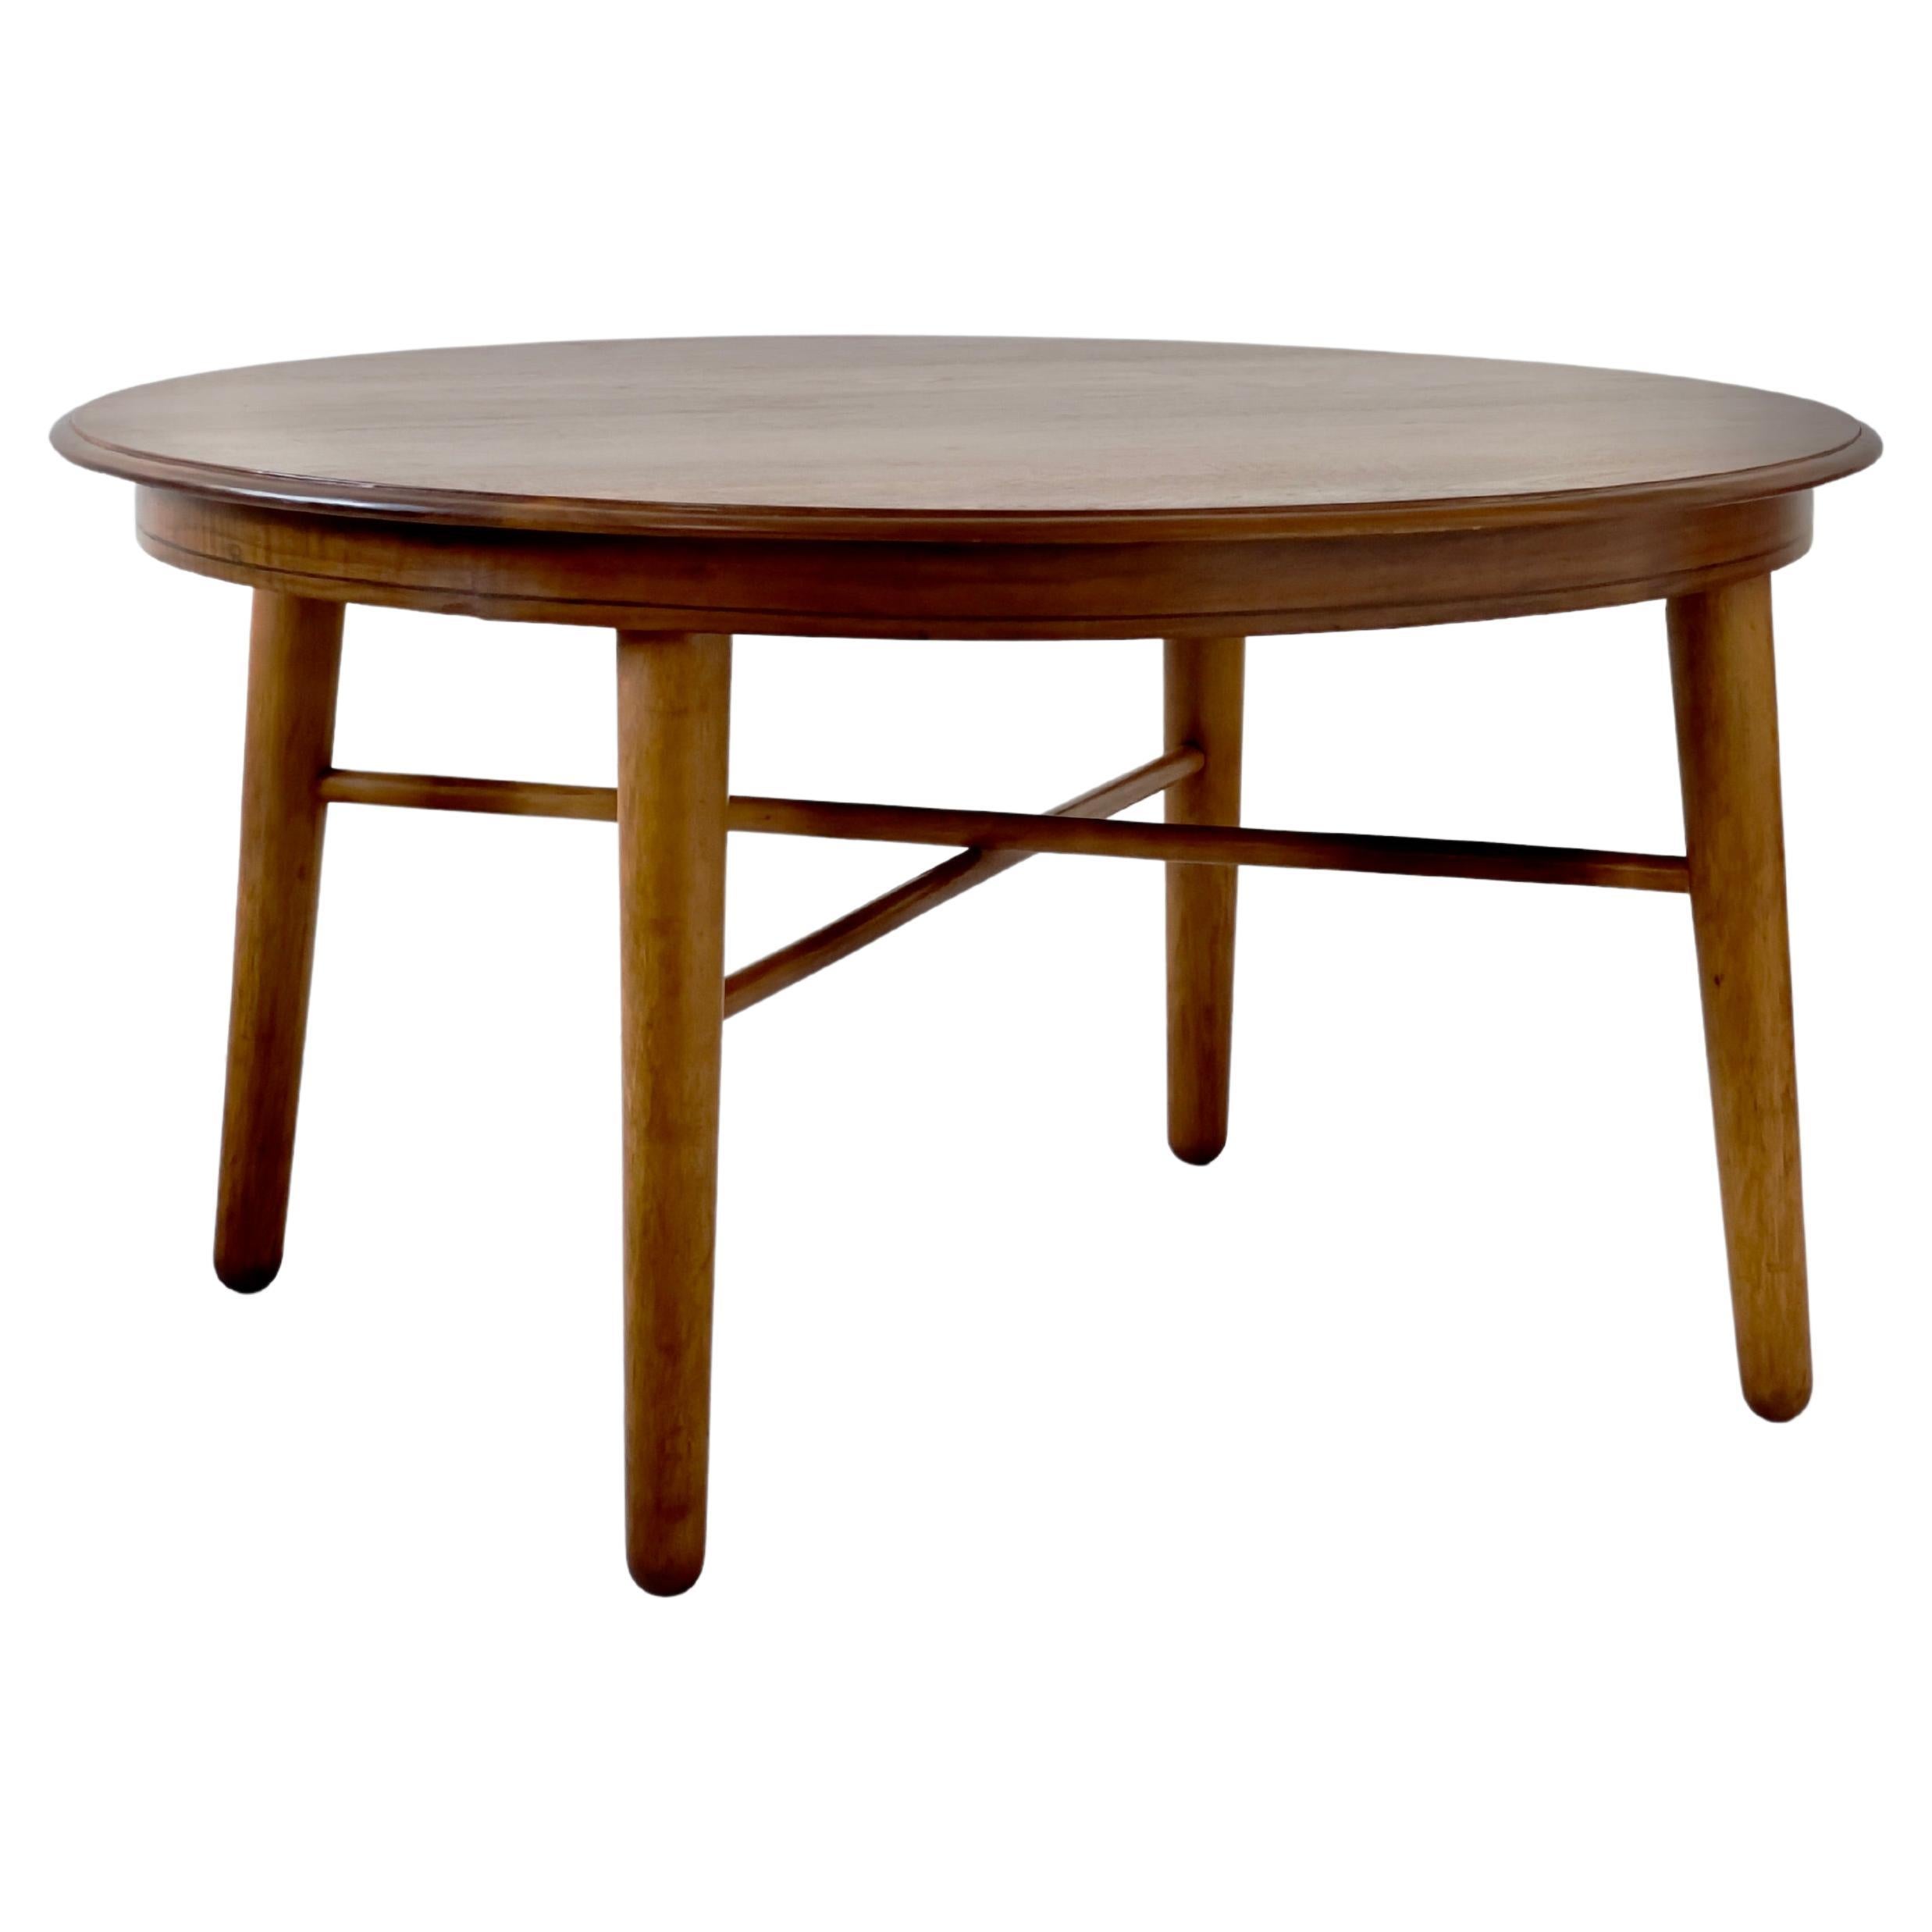 This super elegant 1940s Danish Modern coffee table is a true masterpiece of mid-century design. Crafted with meticulous attention to detail and timeless aesthetics.
The tabletop is constructed from solid nut wood, which not only adds to its